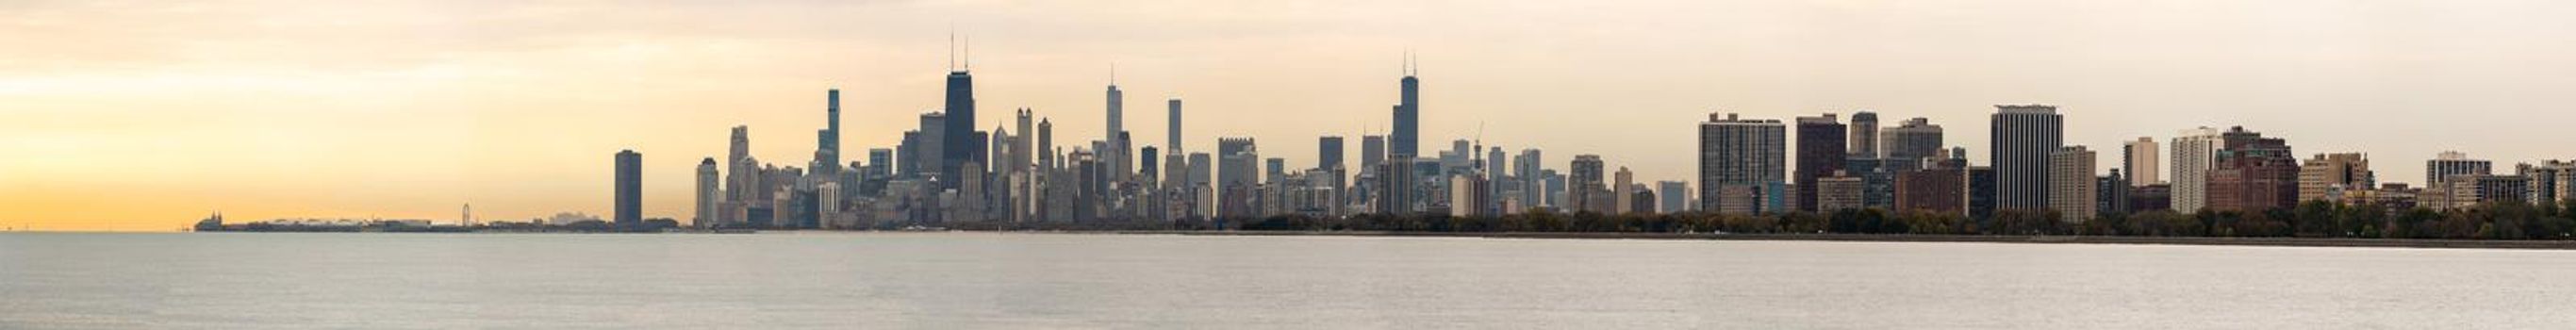 A large panorama of the Chicago Skyline at sunrise with orange clouds in the sky and water below.